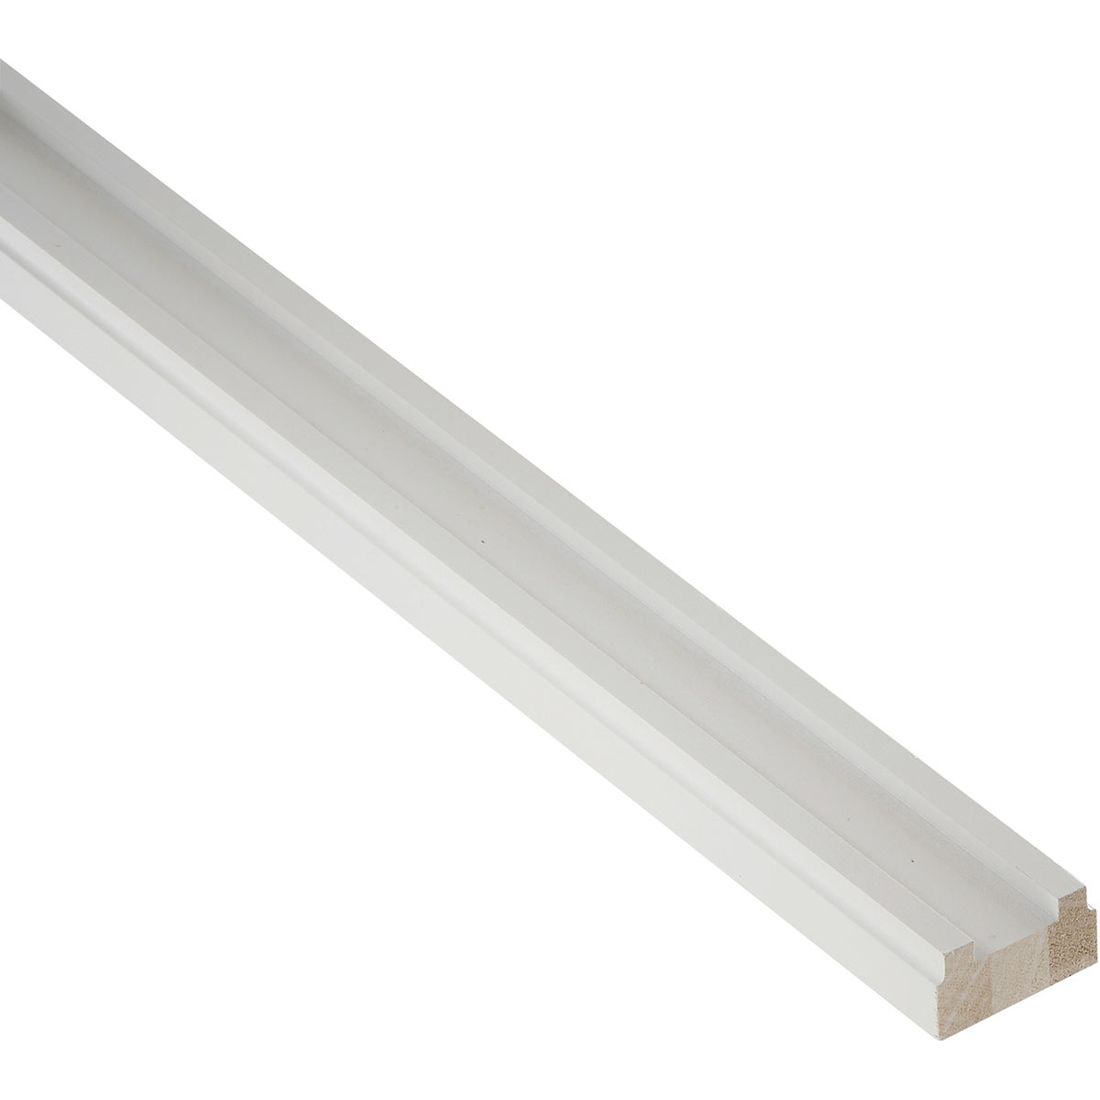 Stair Baserail 32Mm X 62 Mm X 4200 Mm 41Mm Groove White Prime Fsc